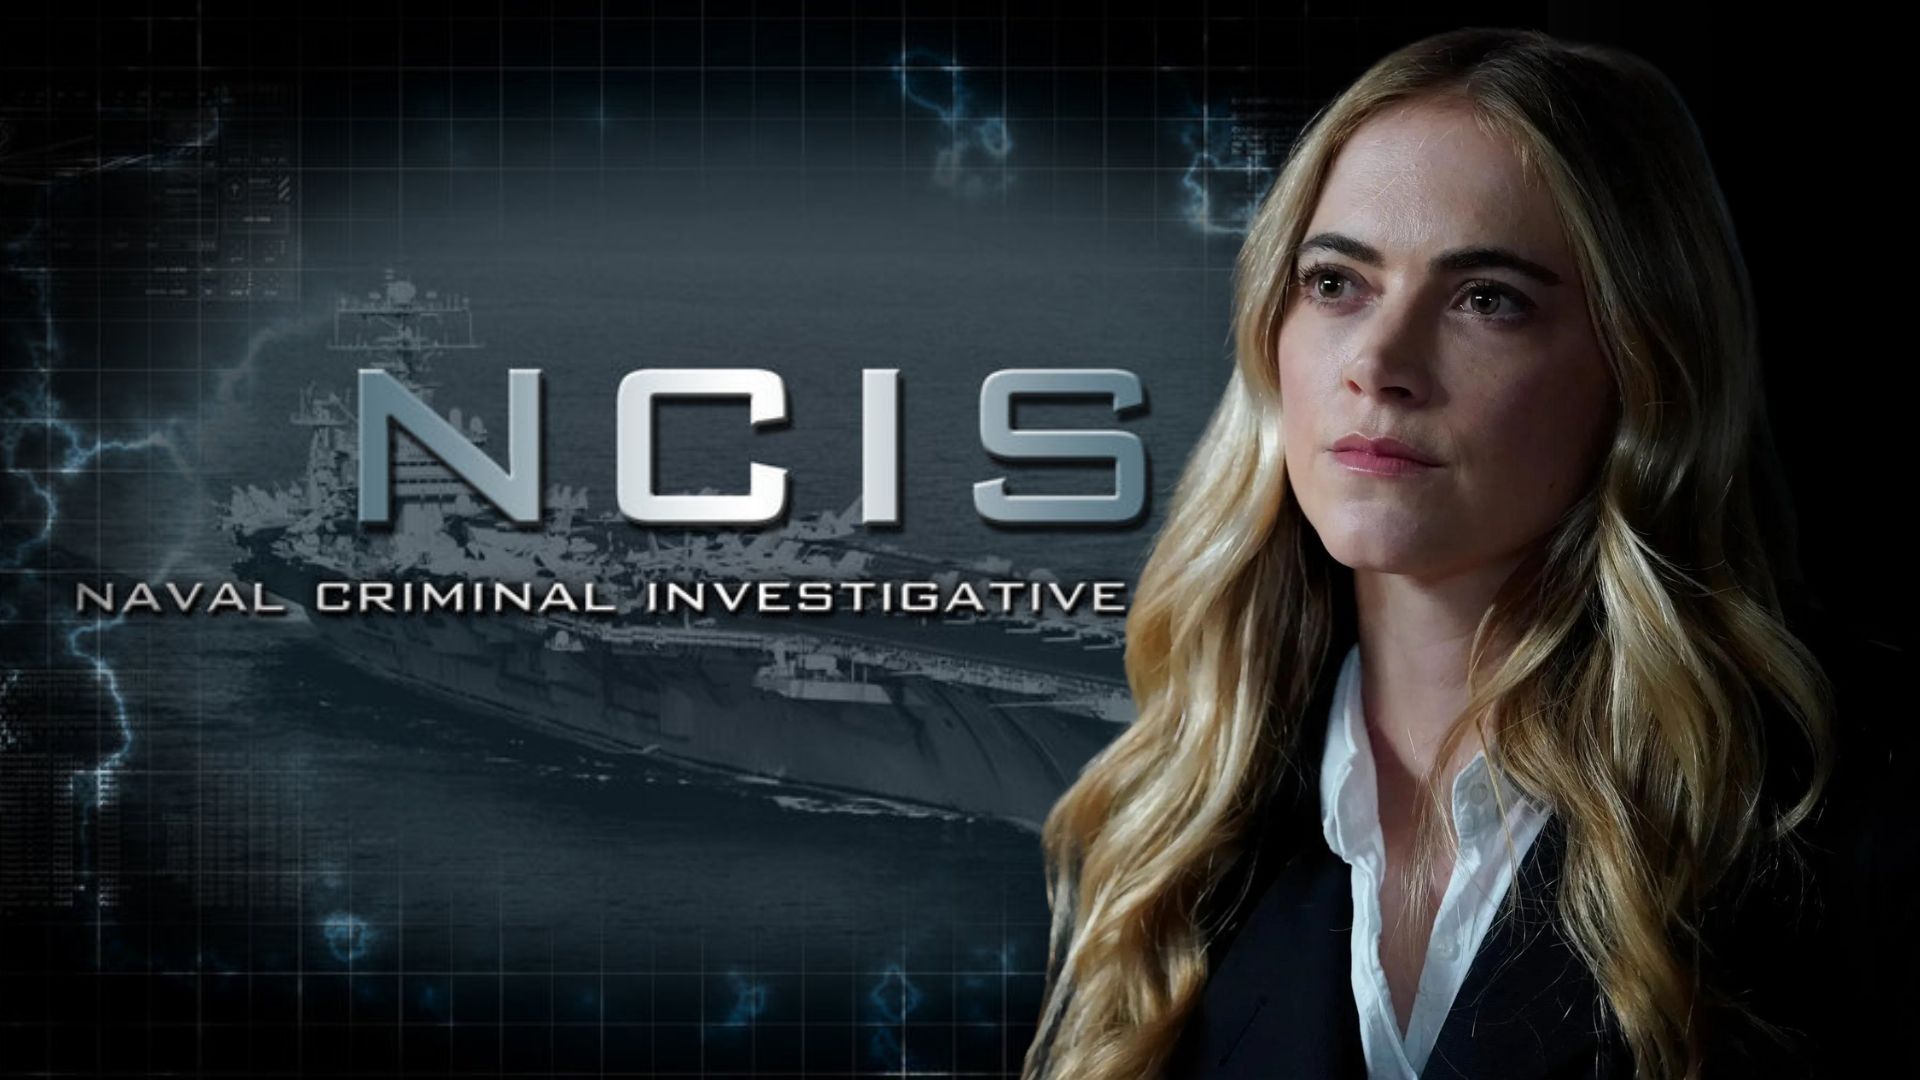 A custom image of Eleanor Bishop (played by Emily Wickersham) in NCIS